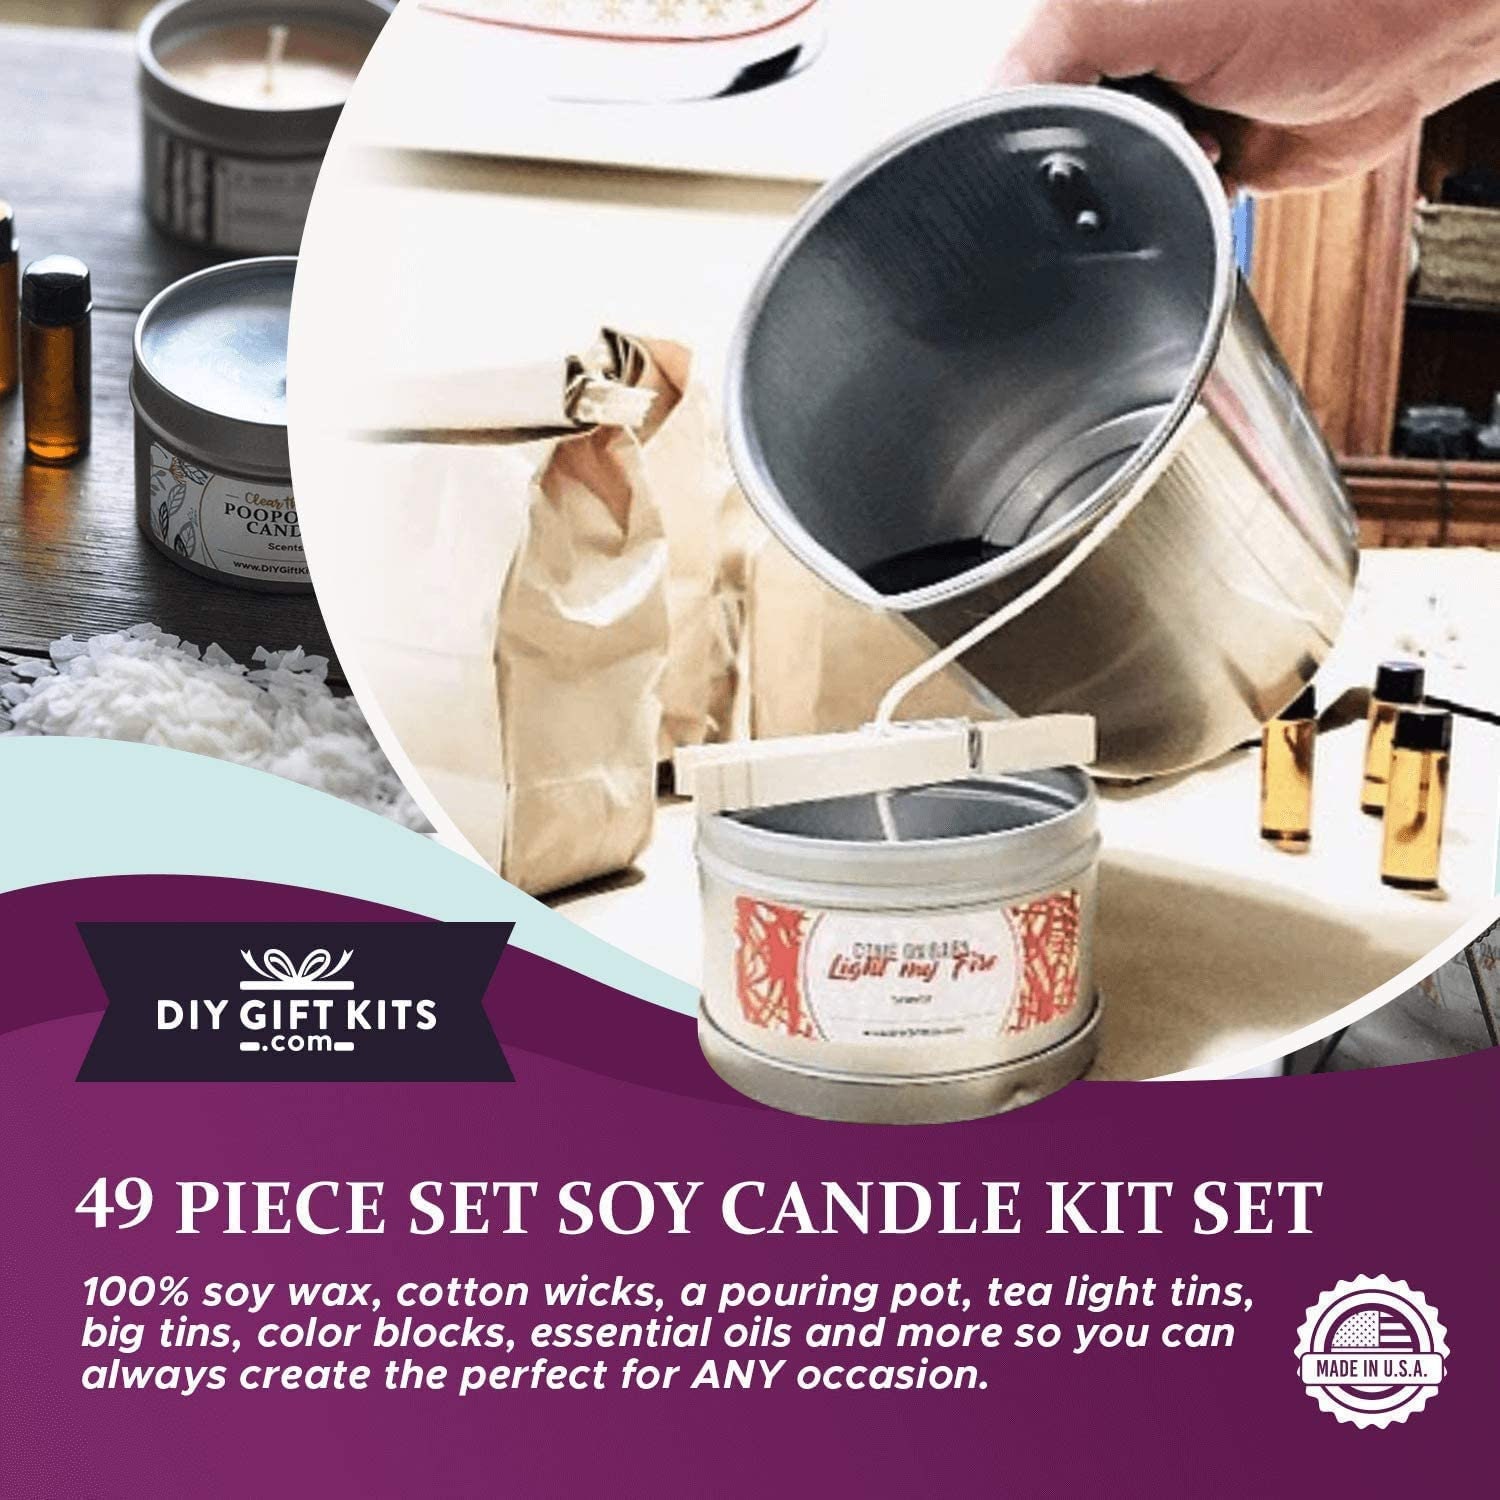 We Make Candle Kit Complete DIY Beginner Set ,soy Wax With 6 Rich